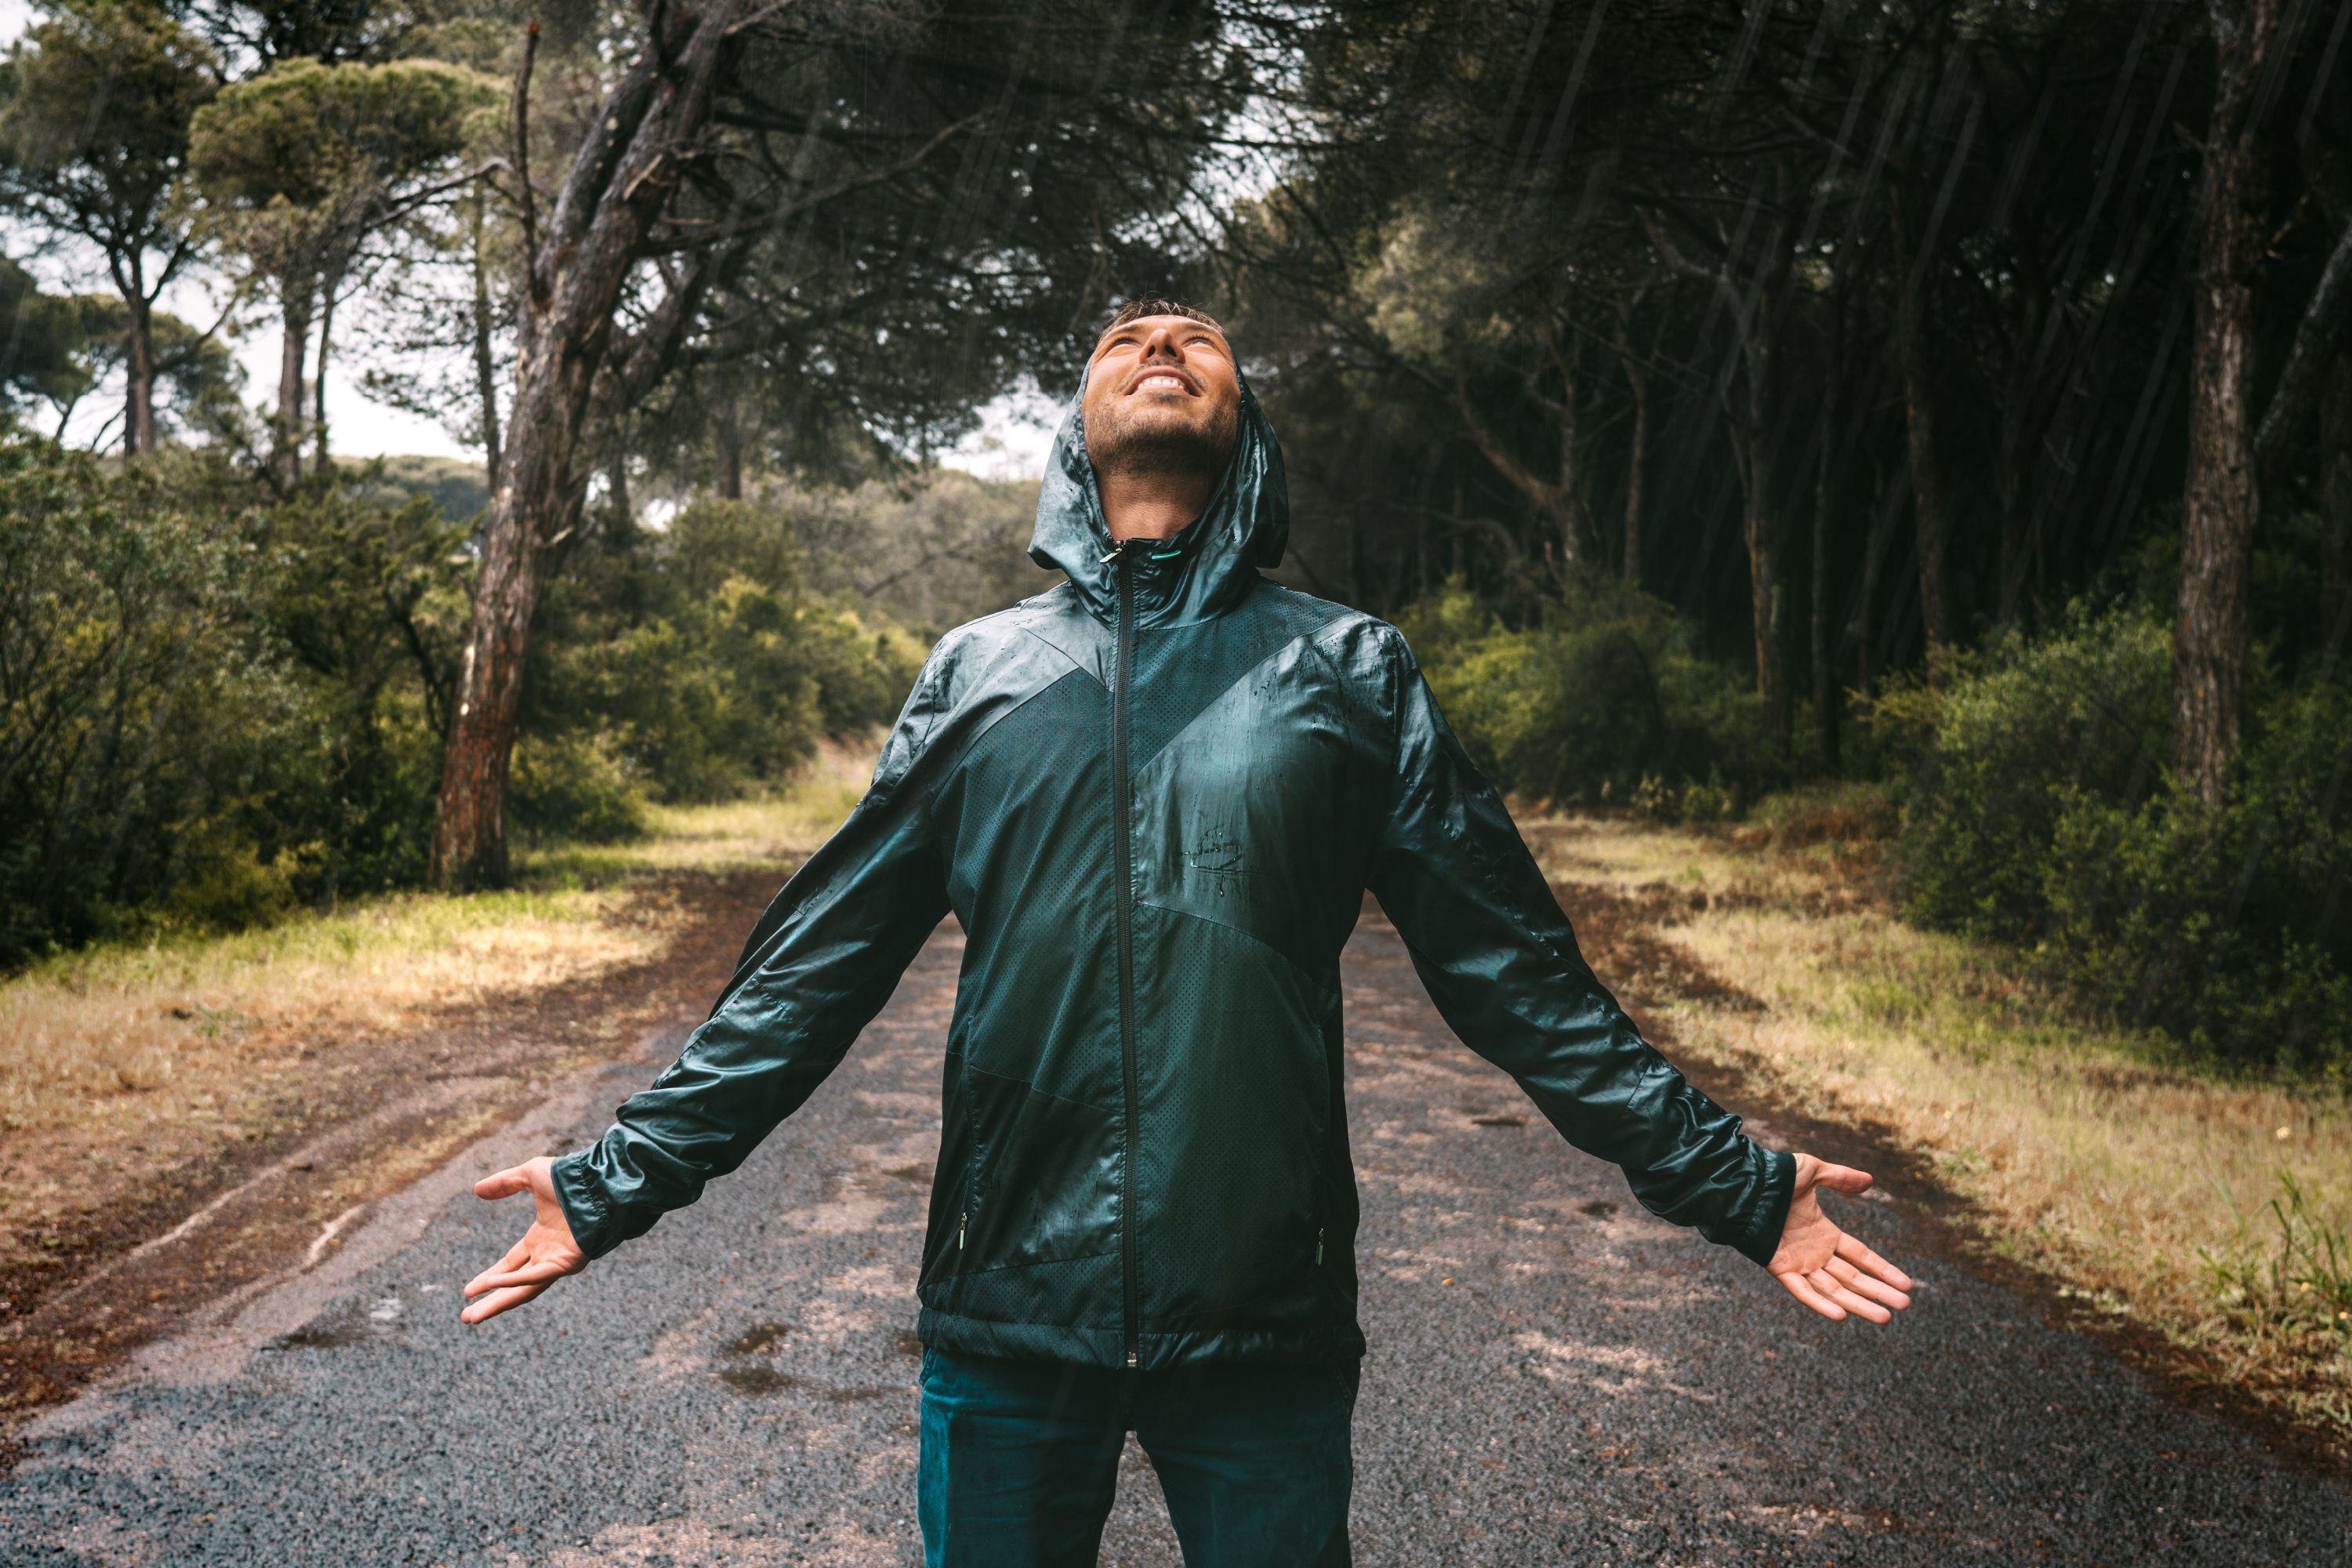 How to waterproof a jacket in 3 simple steps - The Manual